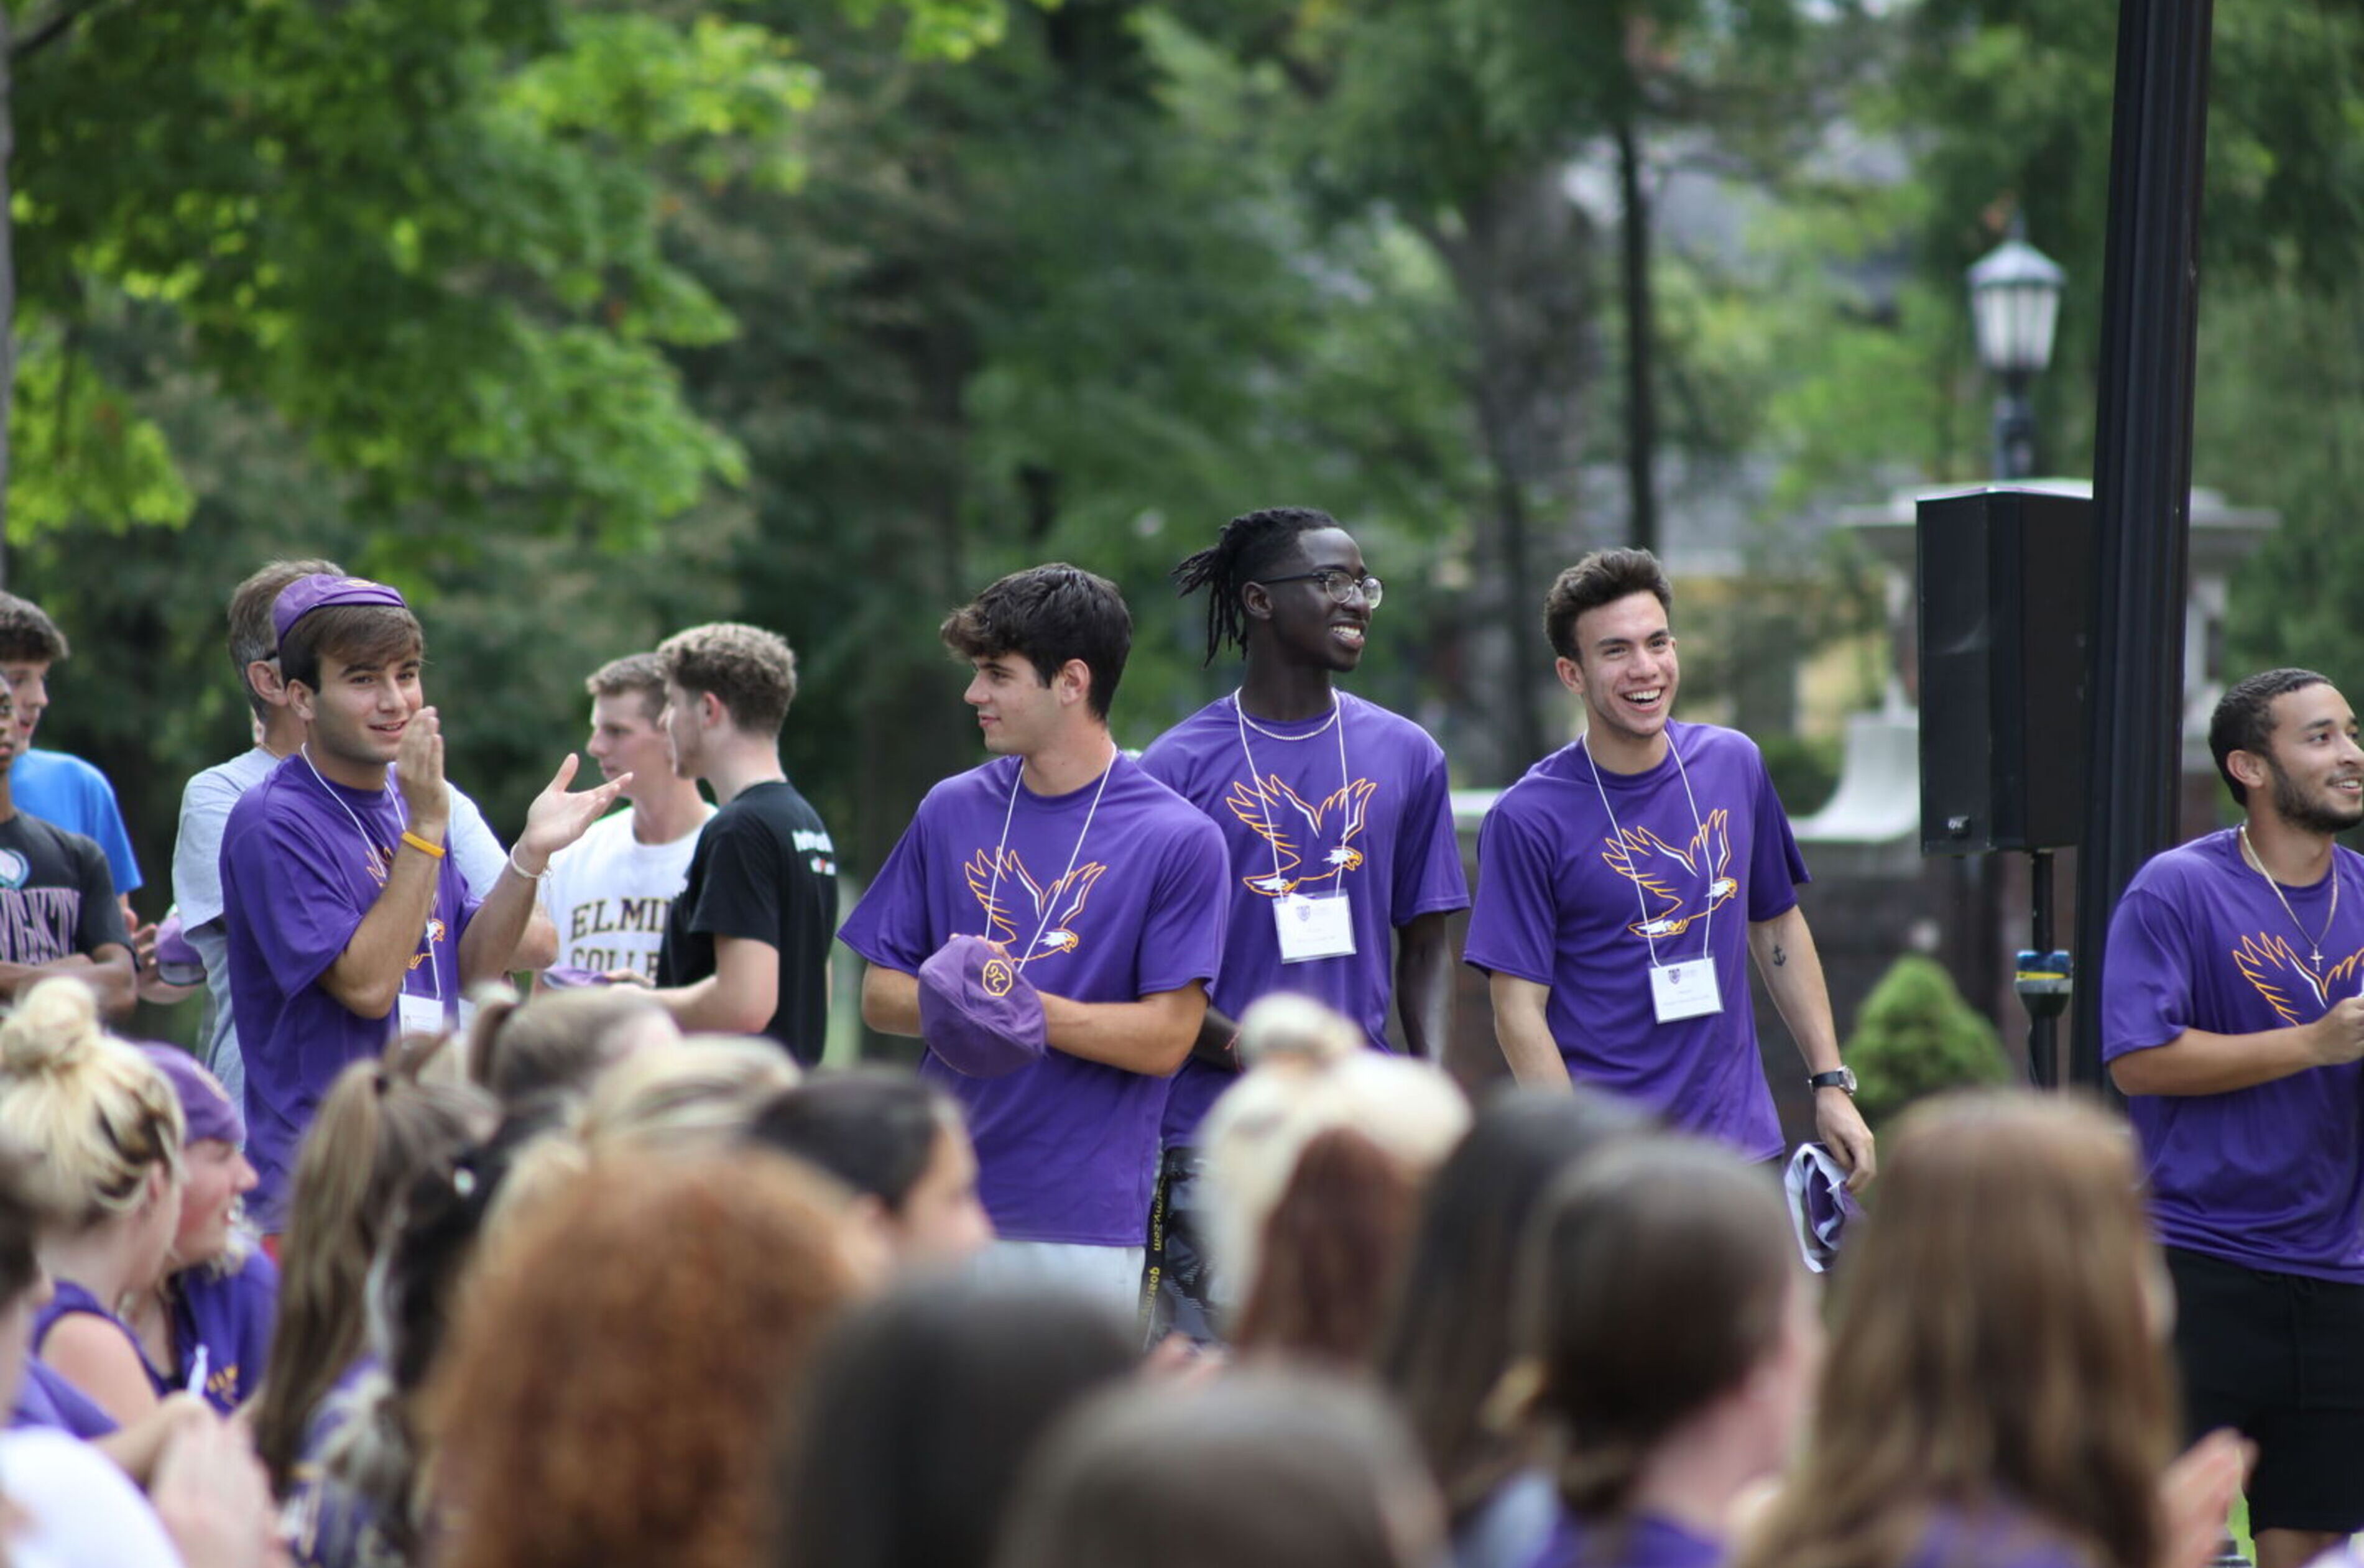 Elmira College students are pictured during the 2022 President's Welcome Address